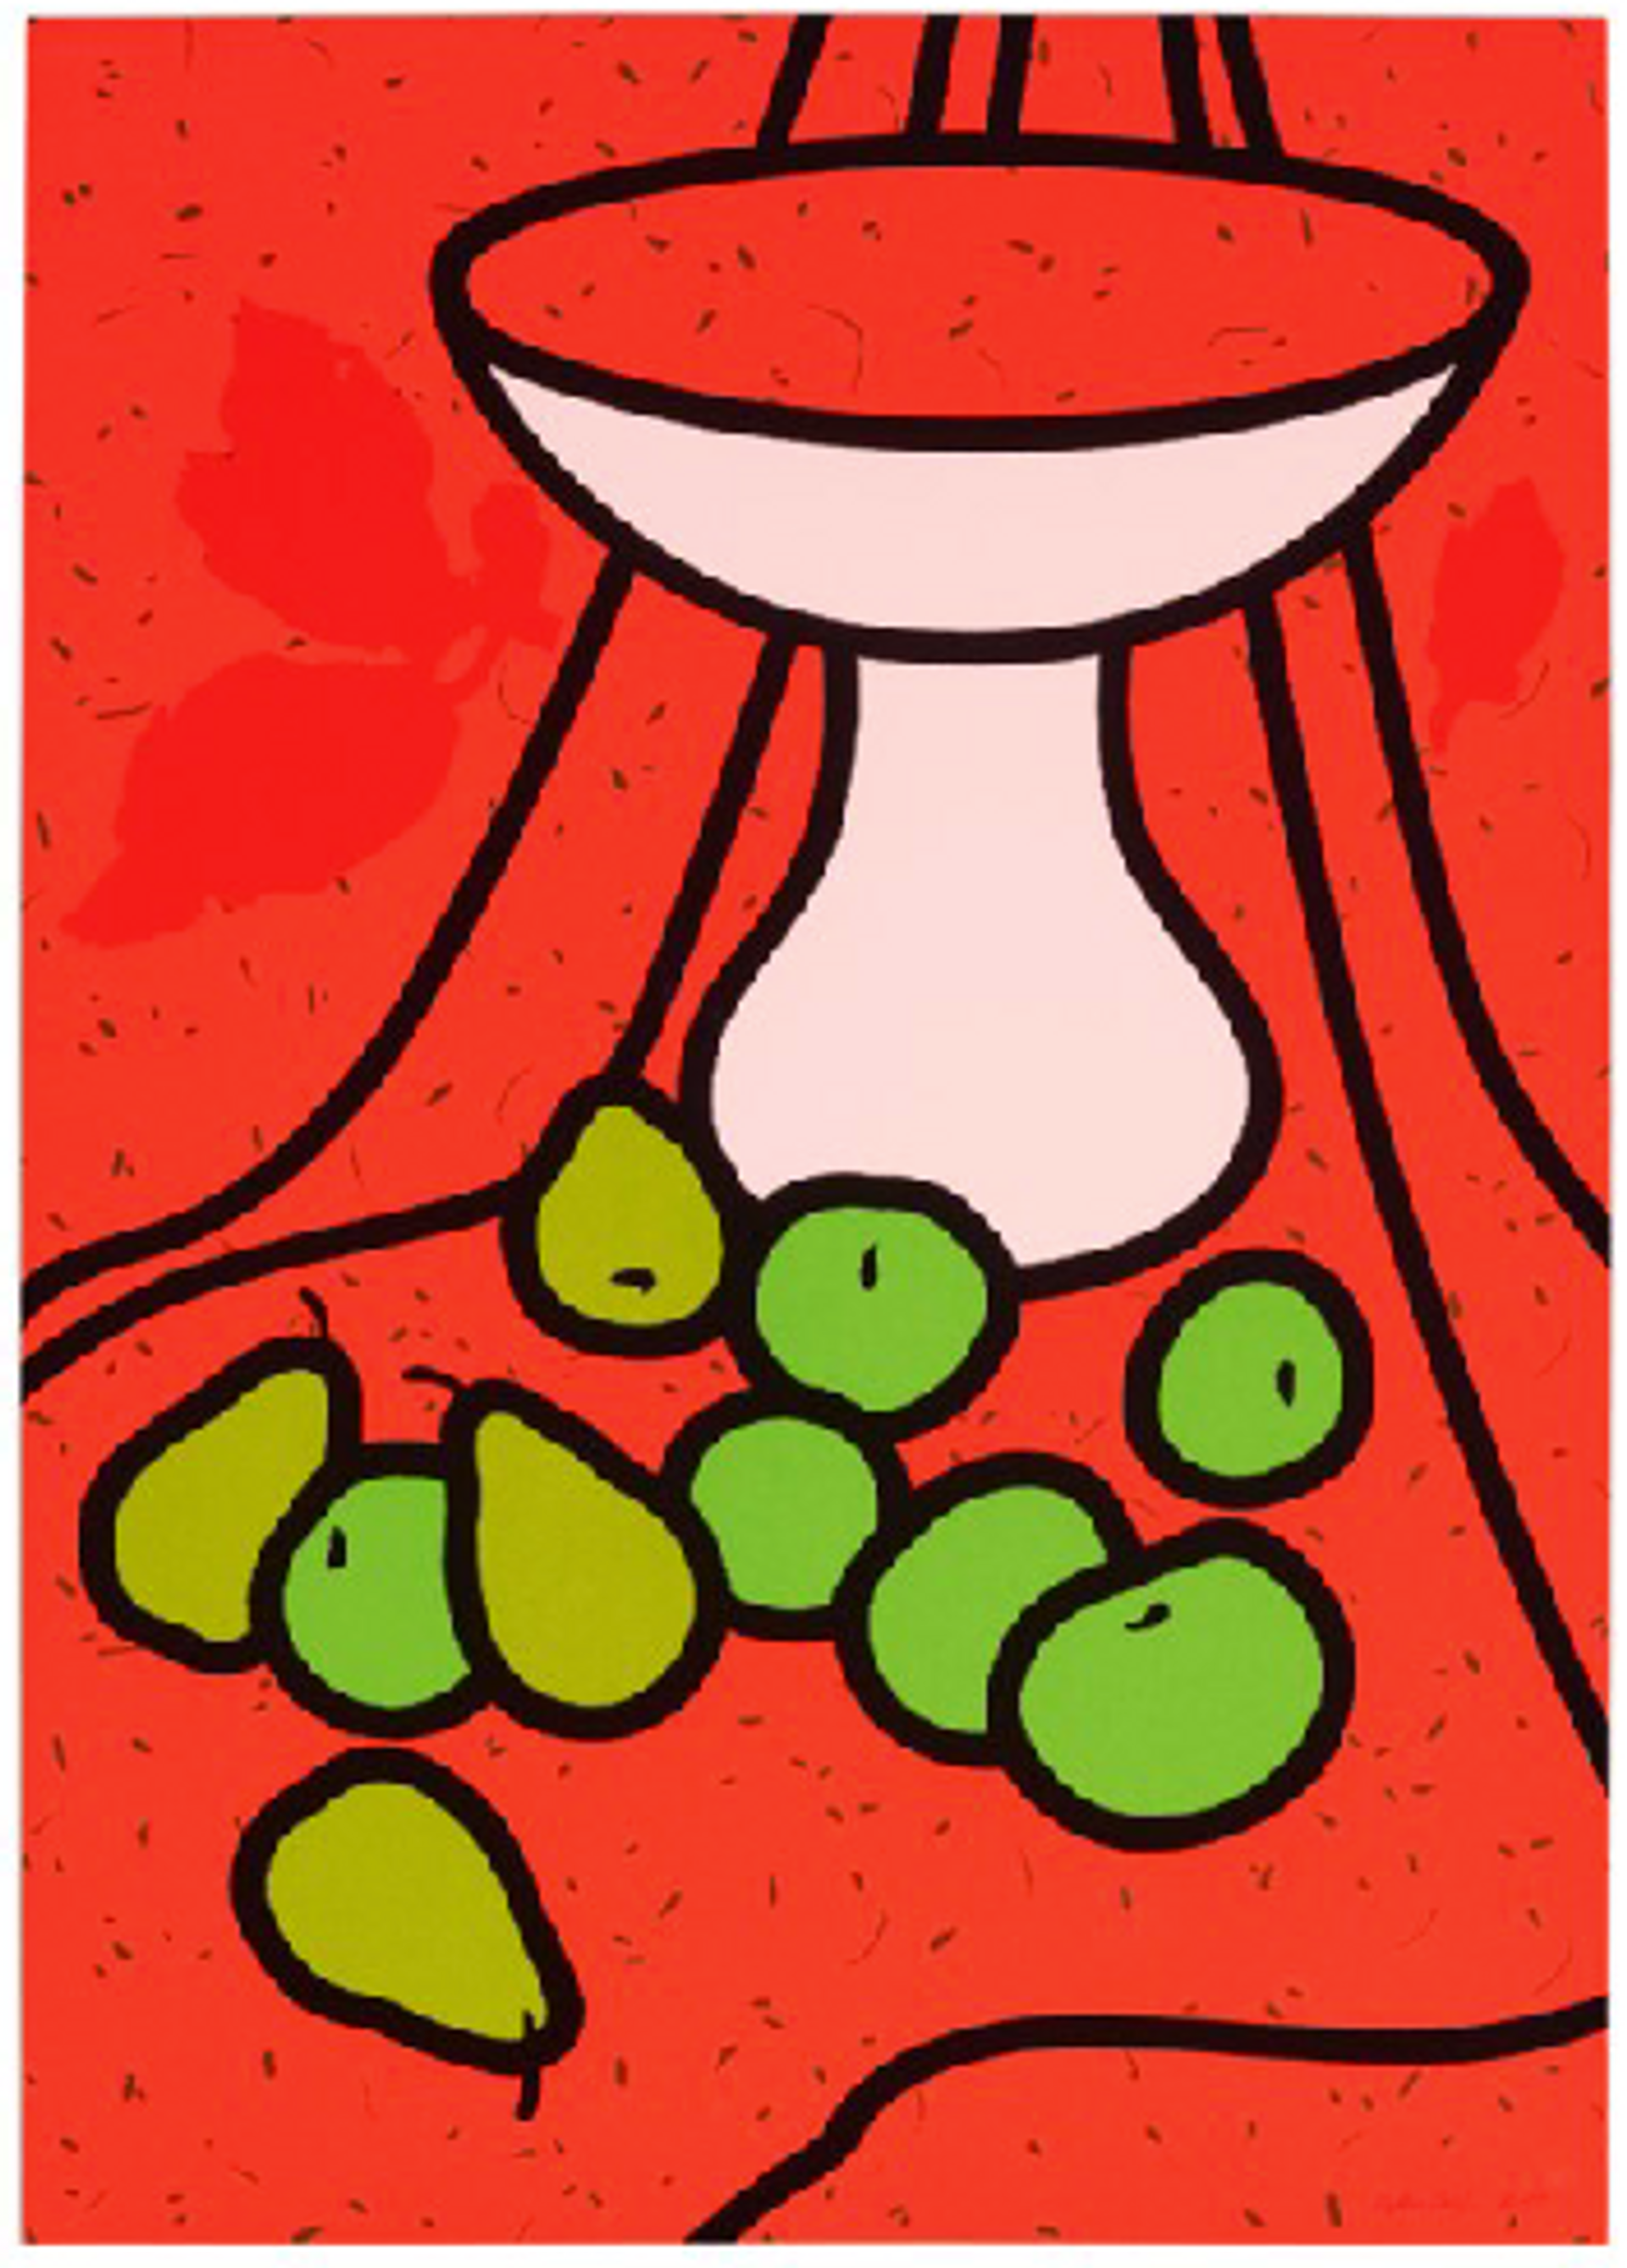 Vibrant orange screenprint with black lines depicting a curtain outline and an empty fruit bowl with bright green pears and apples on a surface next to it.